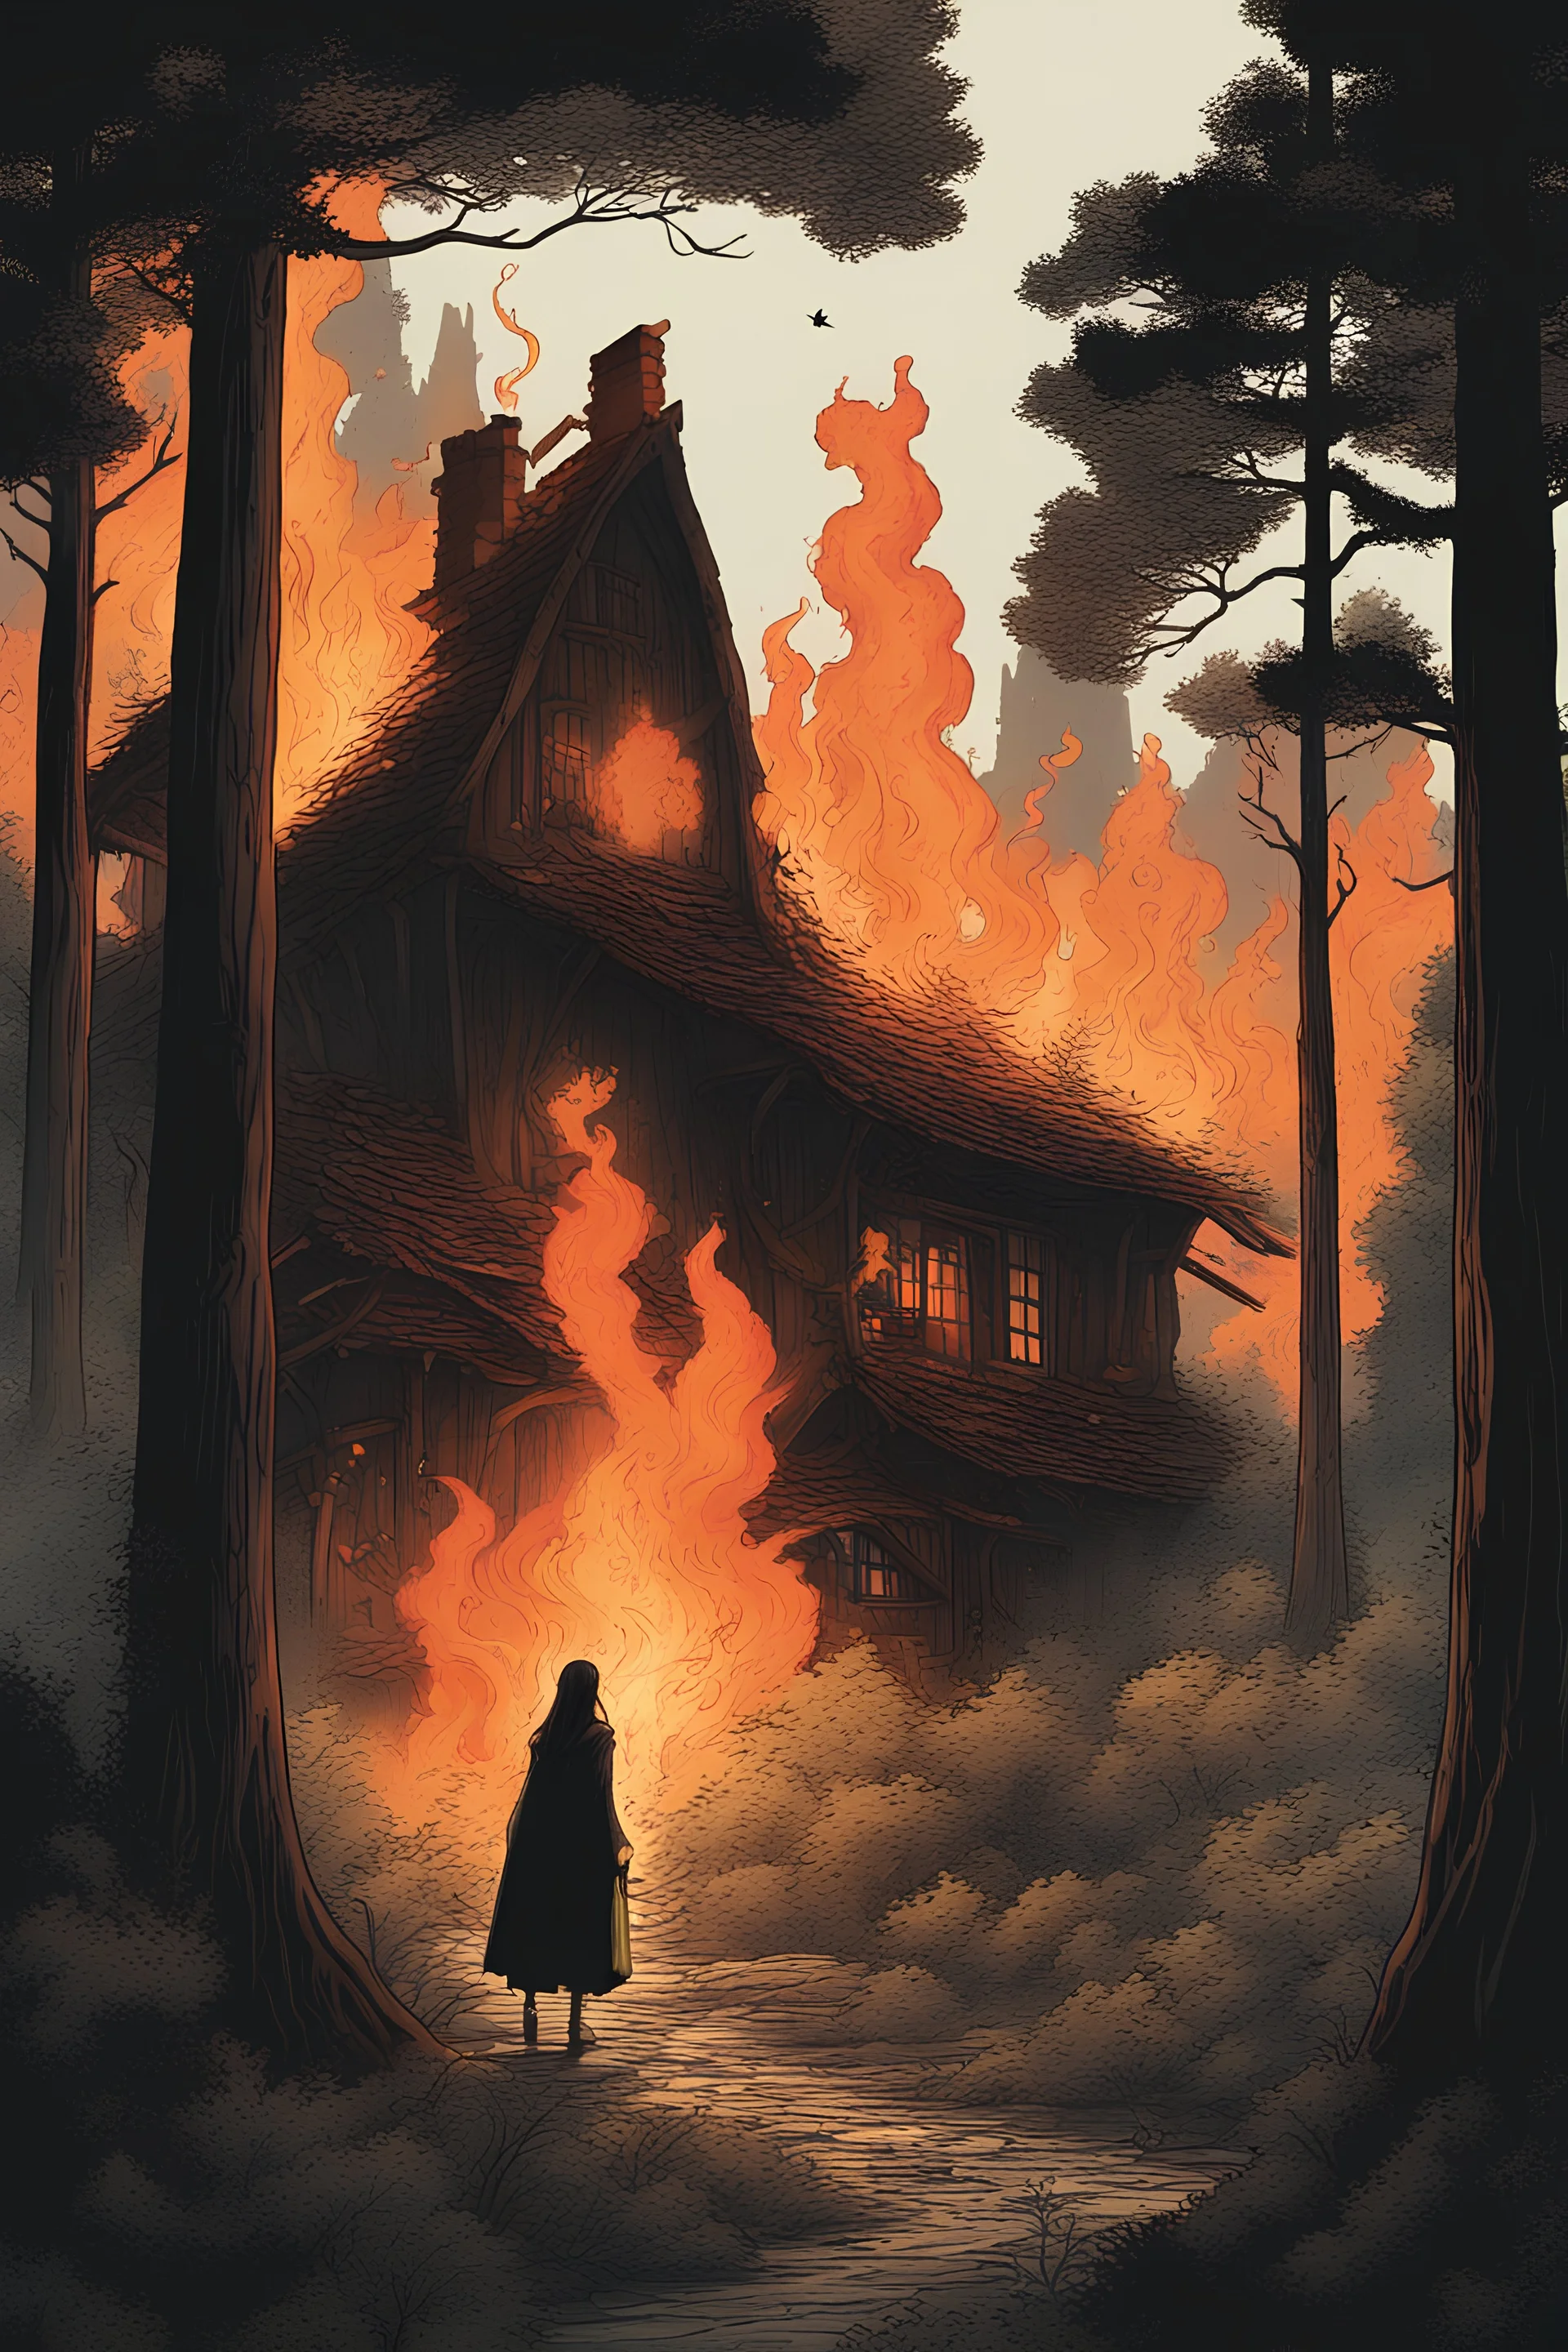 In the heart of a dense, ancient forest, a medieval cottage stands engulfed in flames, its timeworn timbers crackling and sending plumes of smoke into the sky. In the foreground, a mysterious woman in silhouette stands, the house is melting like candy. the house is engulfed in flames. a woman in a cloak hides behind a tree.